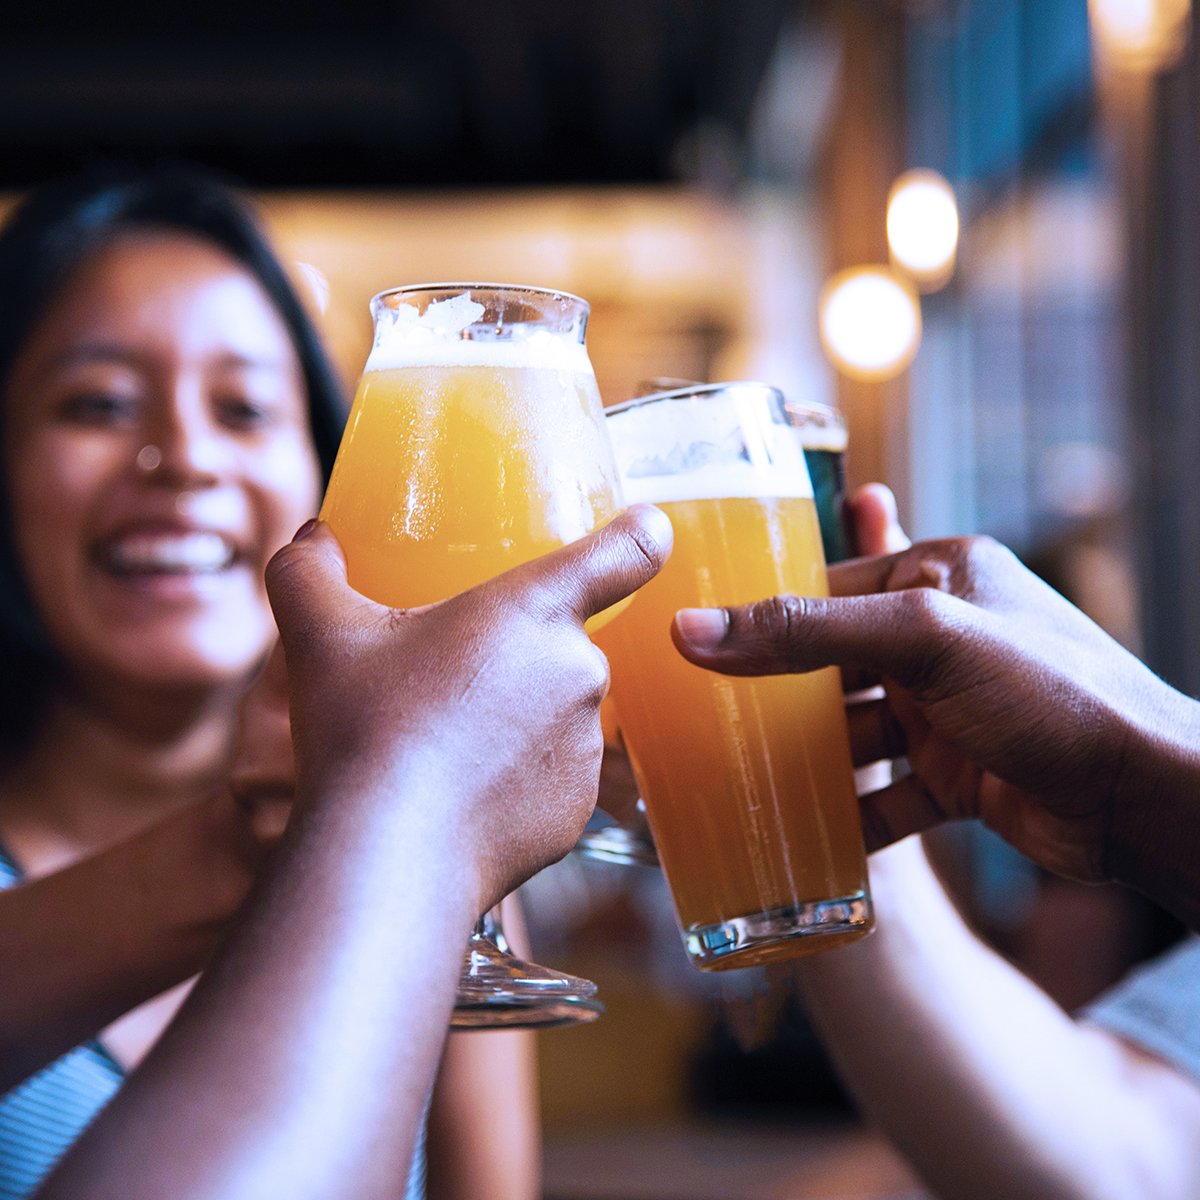 Sour Beers are one of craft brewing's newest trends but with an ancient history! Learn about all things Sour Beer at our tasting this October 25 @ 7:00 p.m. 🍻 Learn more here >> ow.ly/Xpej30lfd3z